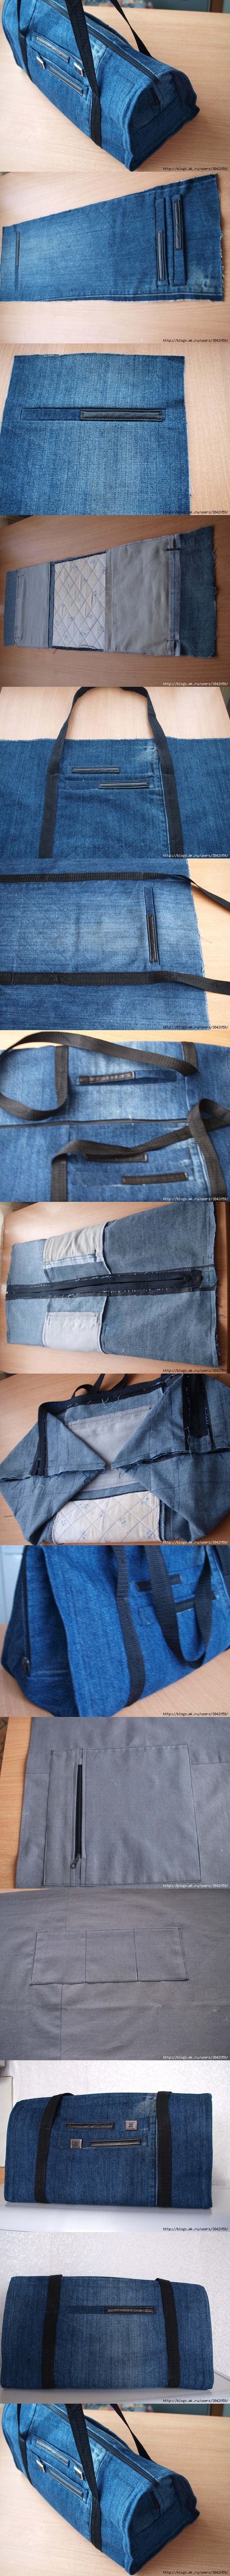 bag-from-jean-tutorial